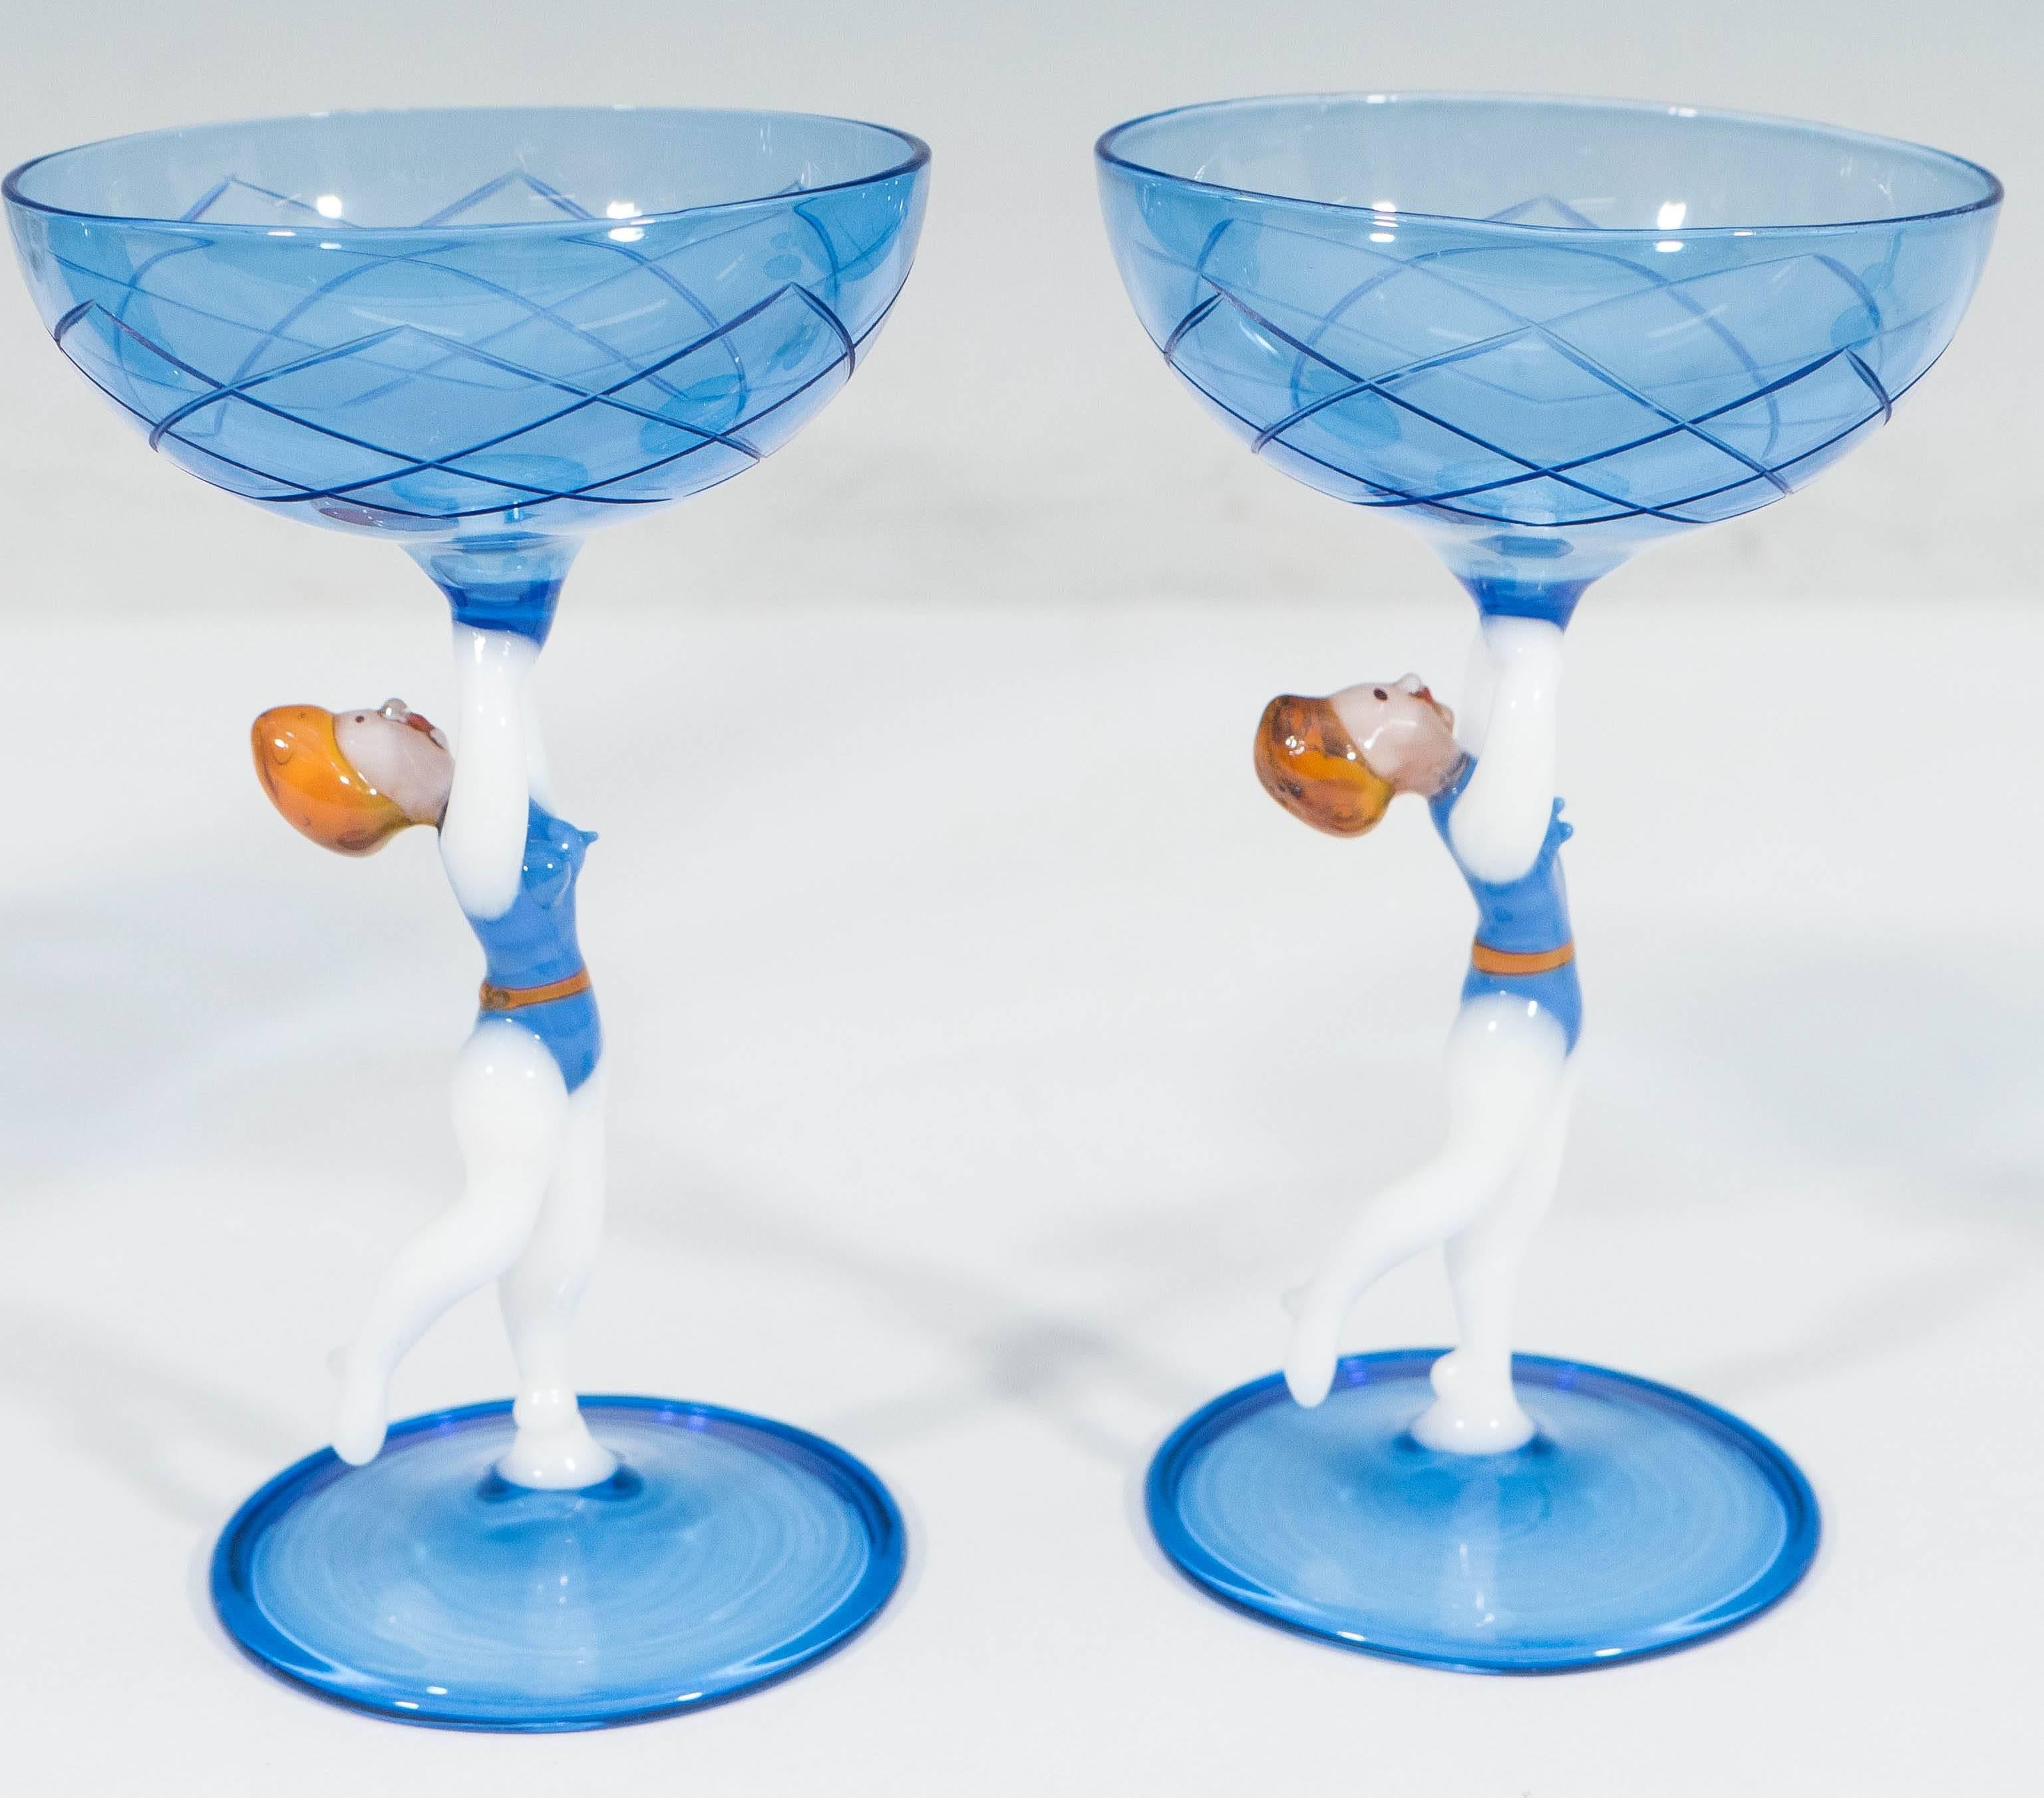 A decanter and matching set of three cordials in hand-blown blue glass, in the style of Bimini, exteriors detailed with crosshatching, the stems designed as synchronized swimmers, with a bikini-clad figure inside the decanter. Very good vintage